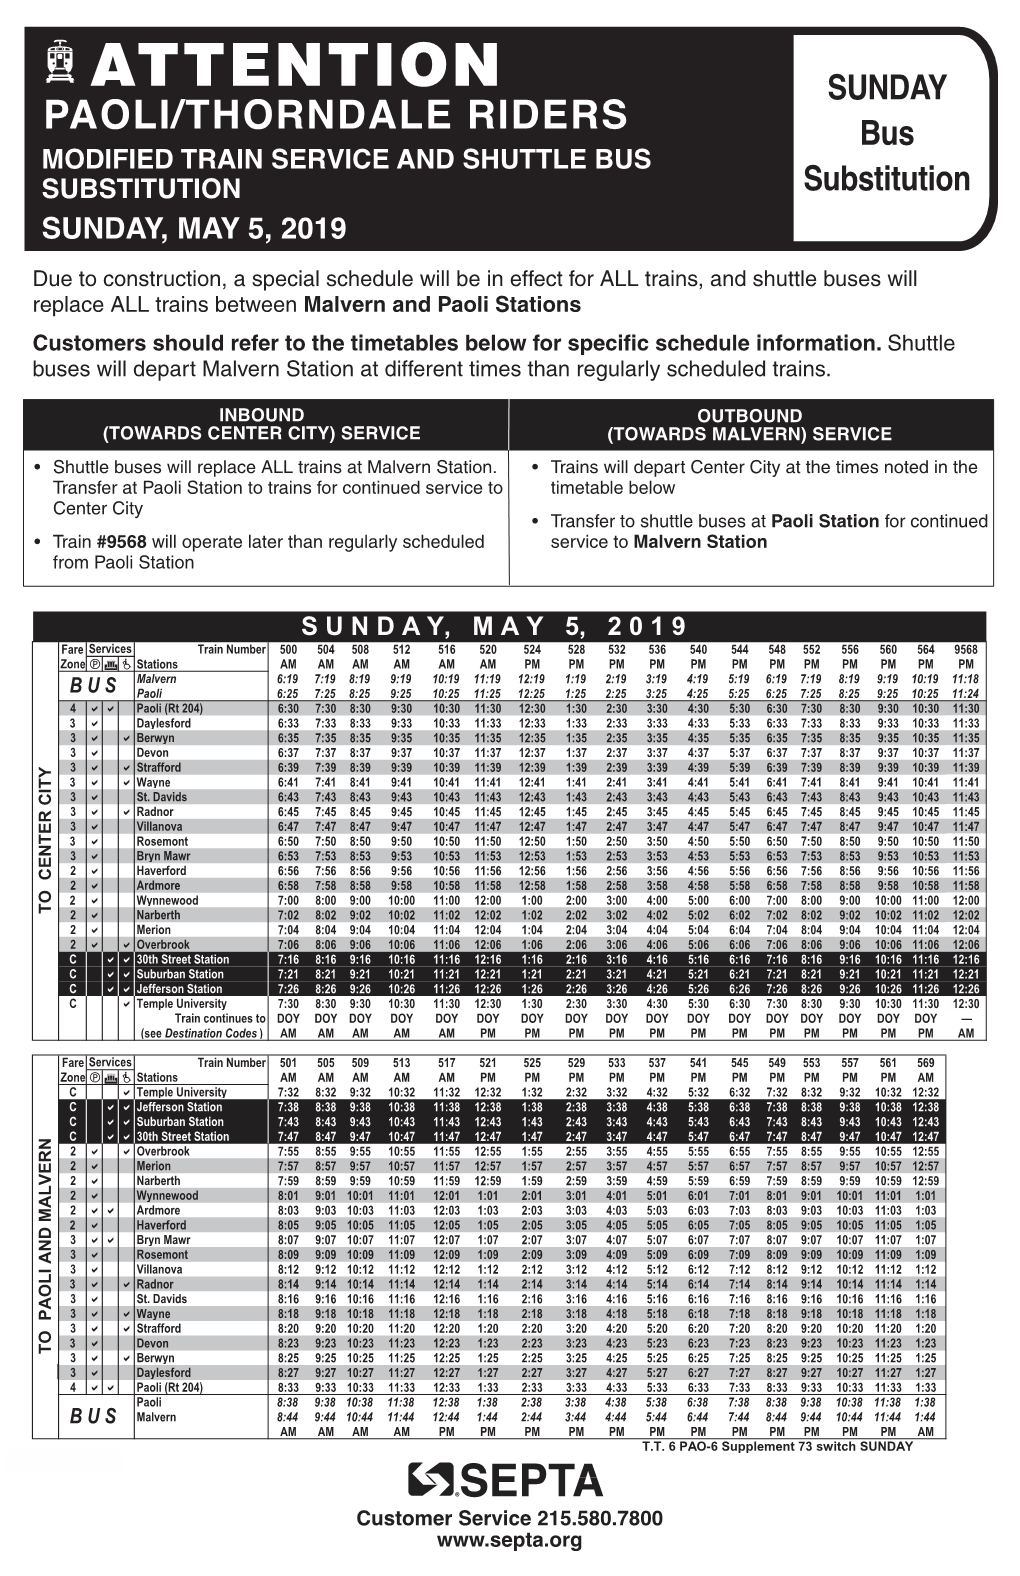 PAOLI THORNDALE SUN Sched Notice 11X17